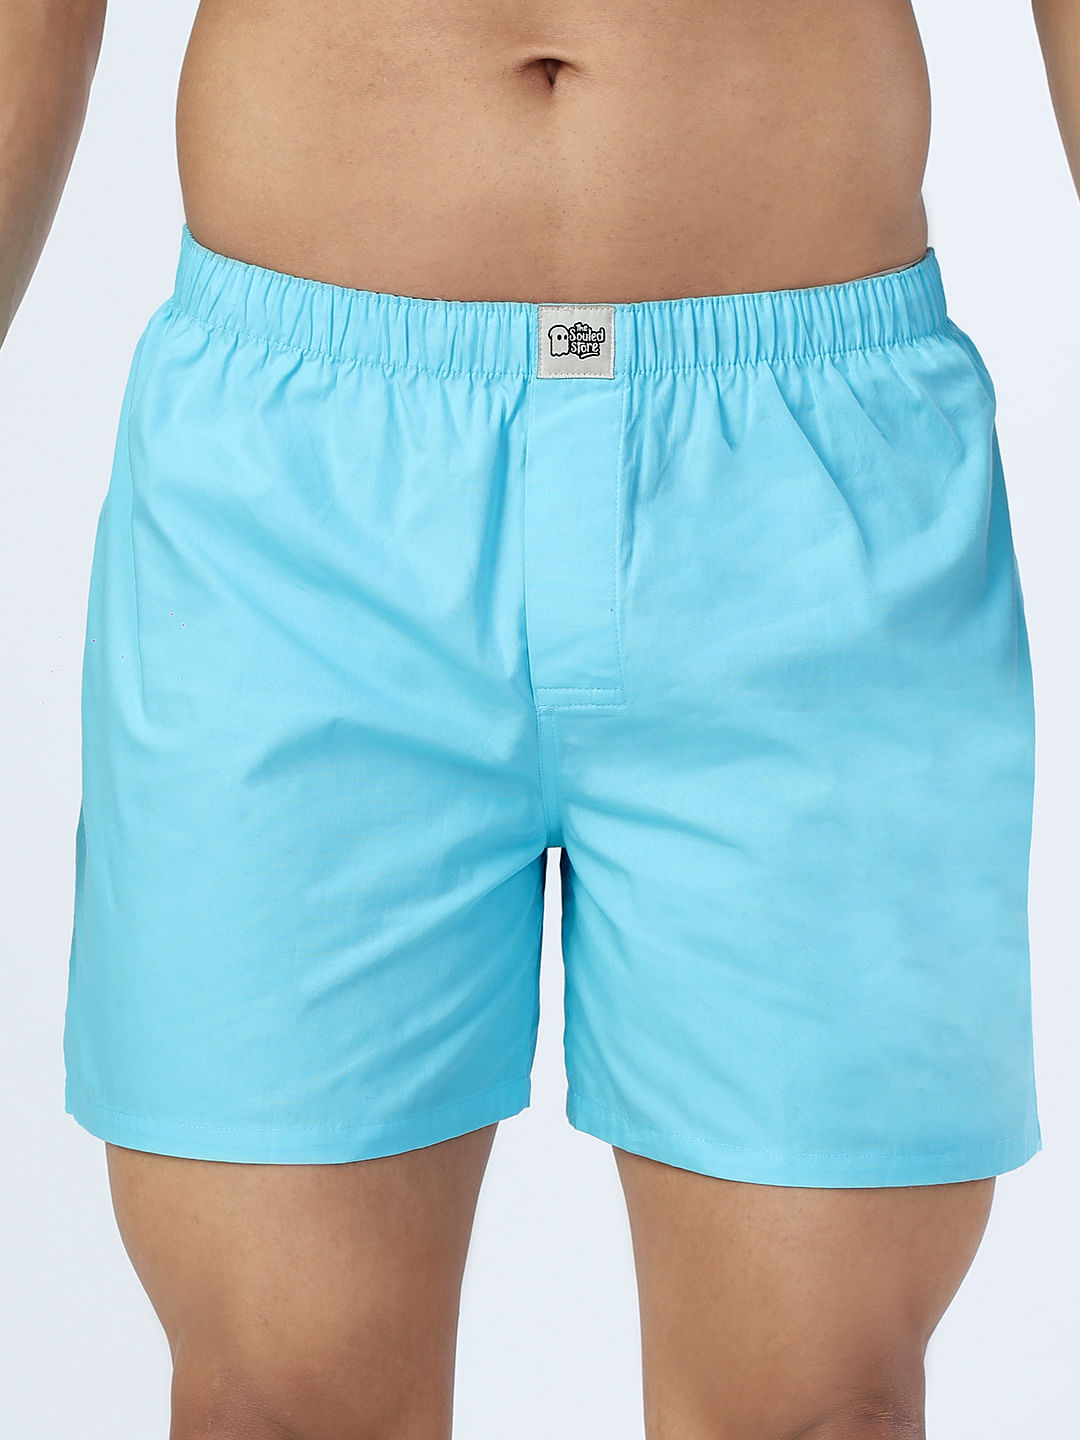 Buy Solids: Sky Blue Boxer Shorts online at The Souled Store.